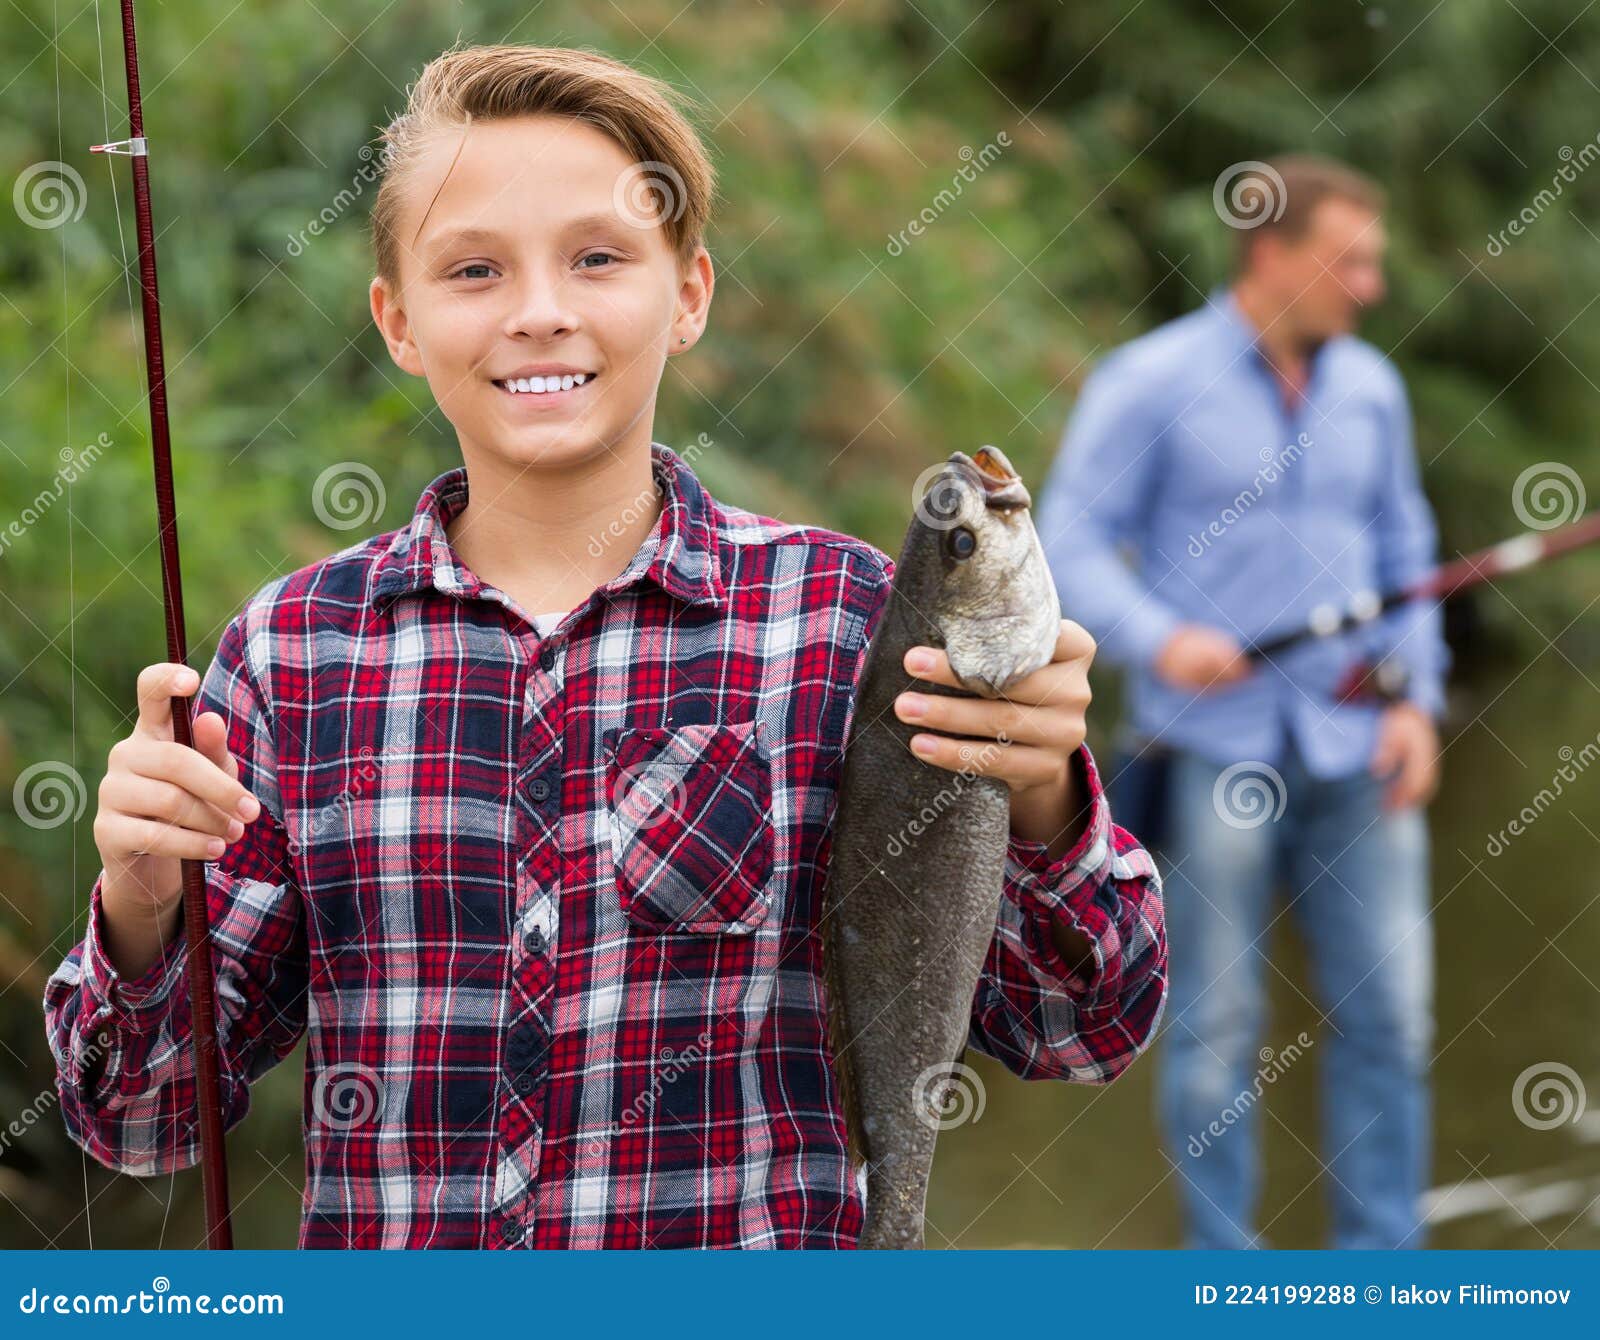 Smiling Teenage Boy Holding Catch Freshwater Fish In Hands Stock